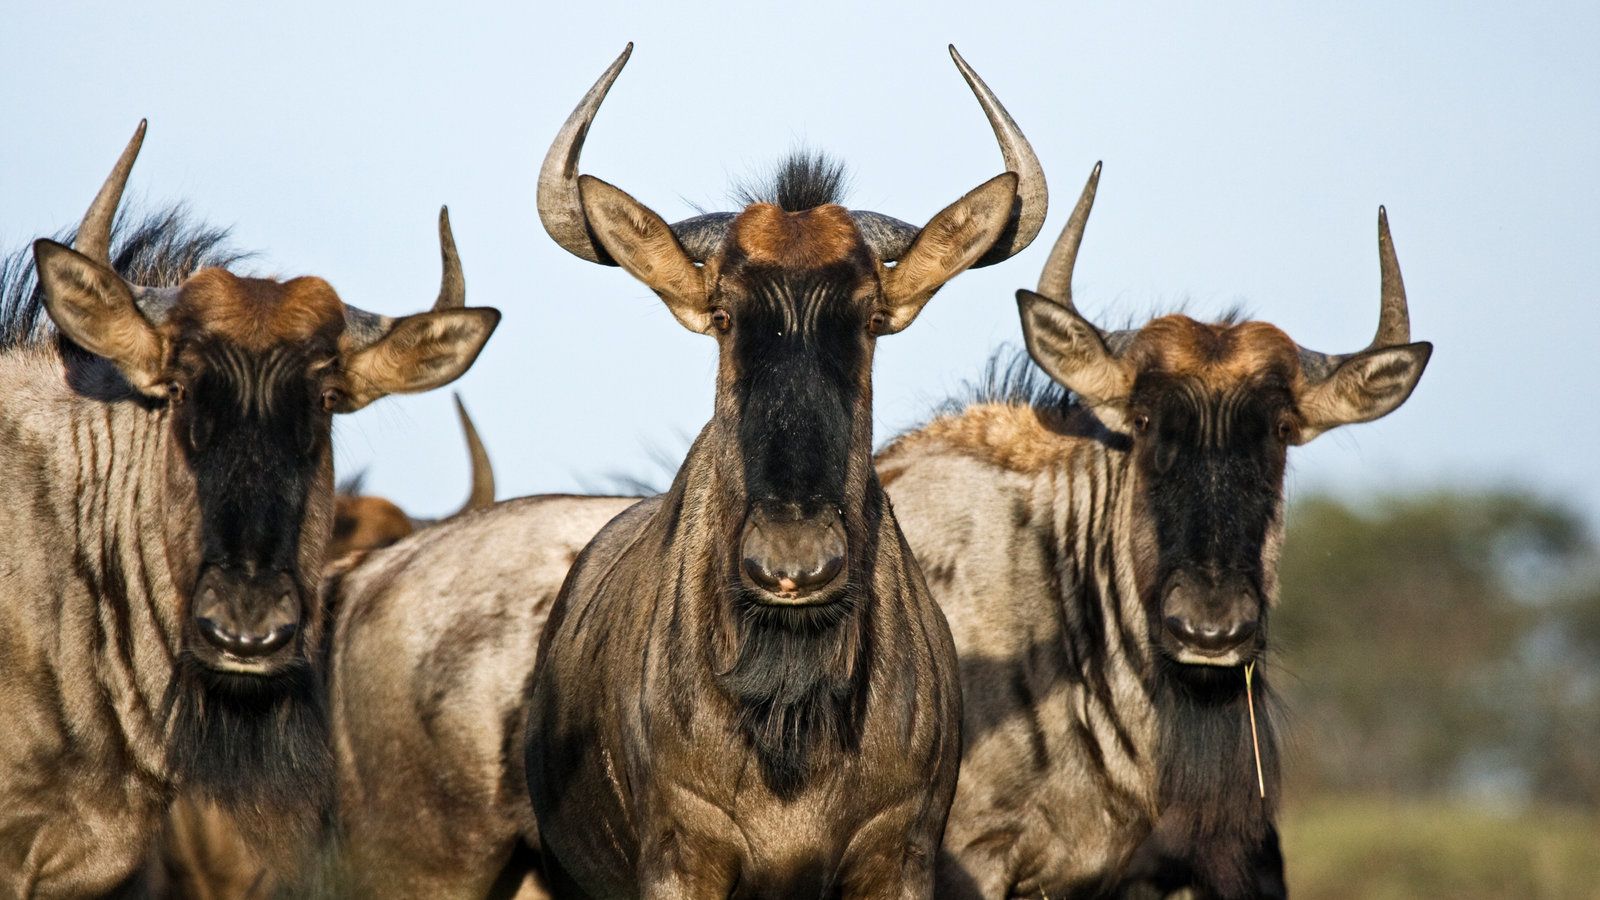 The Wildebeest Is One Highly Toned Machine